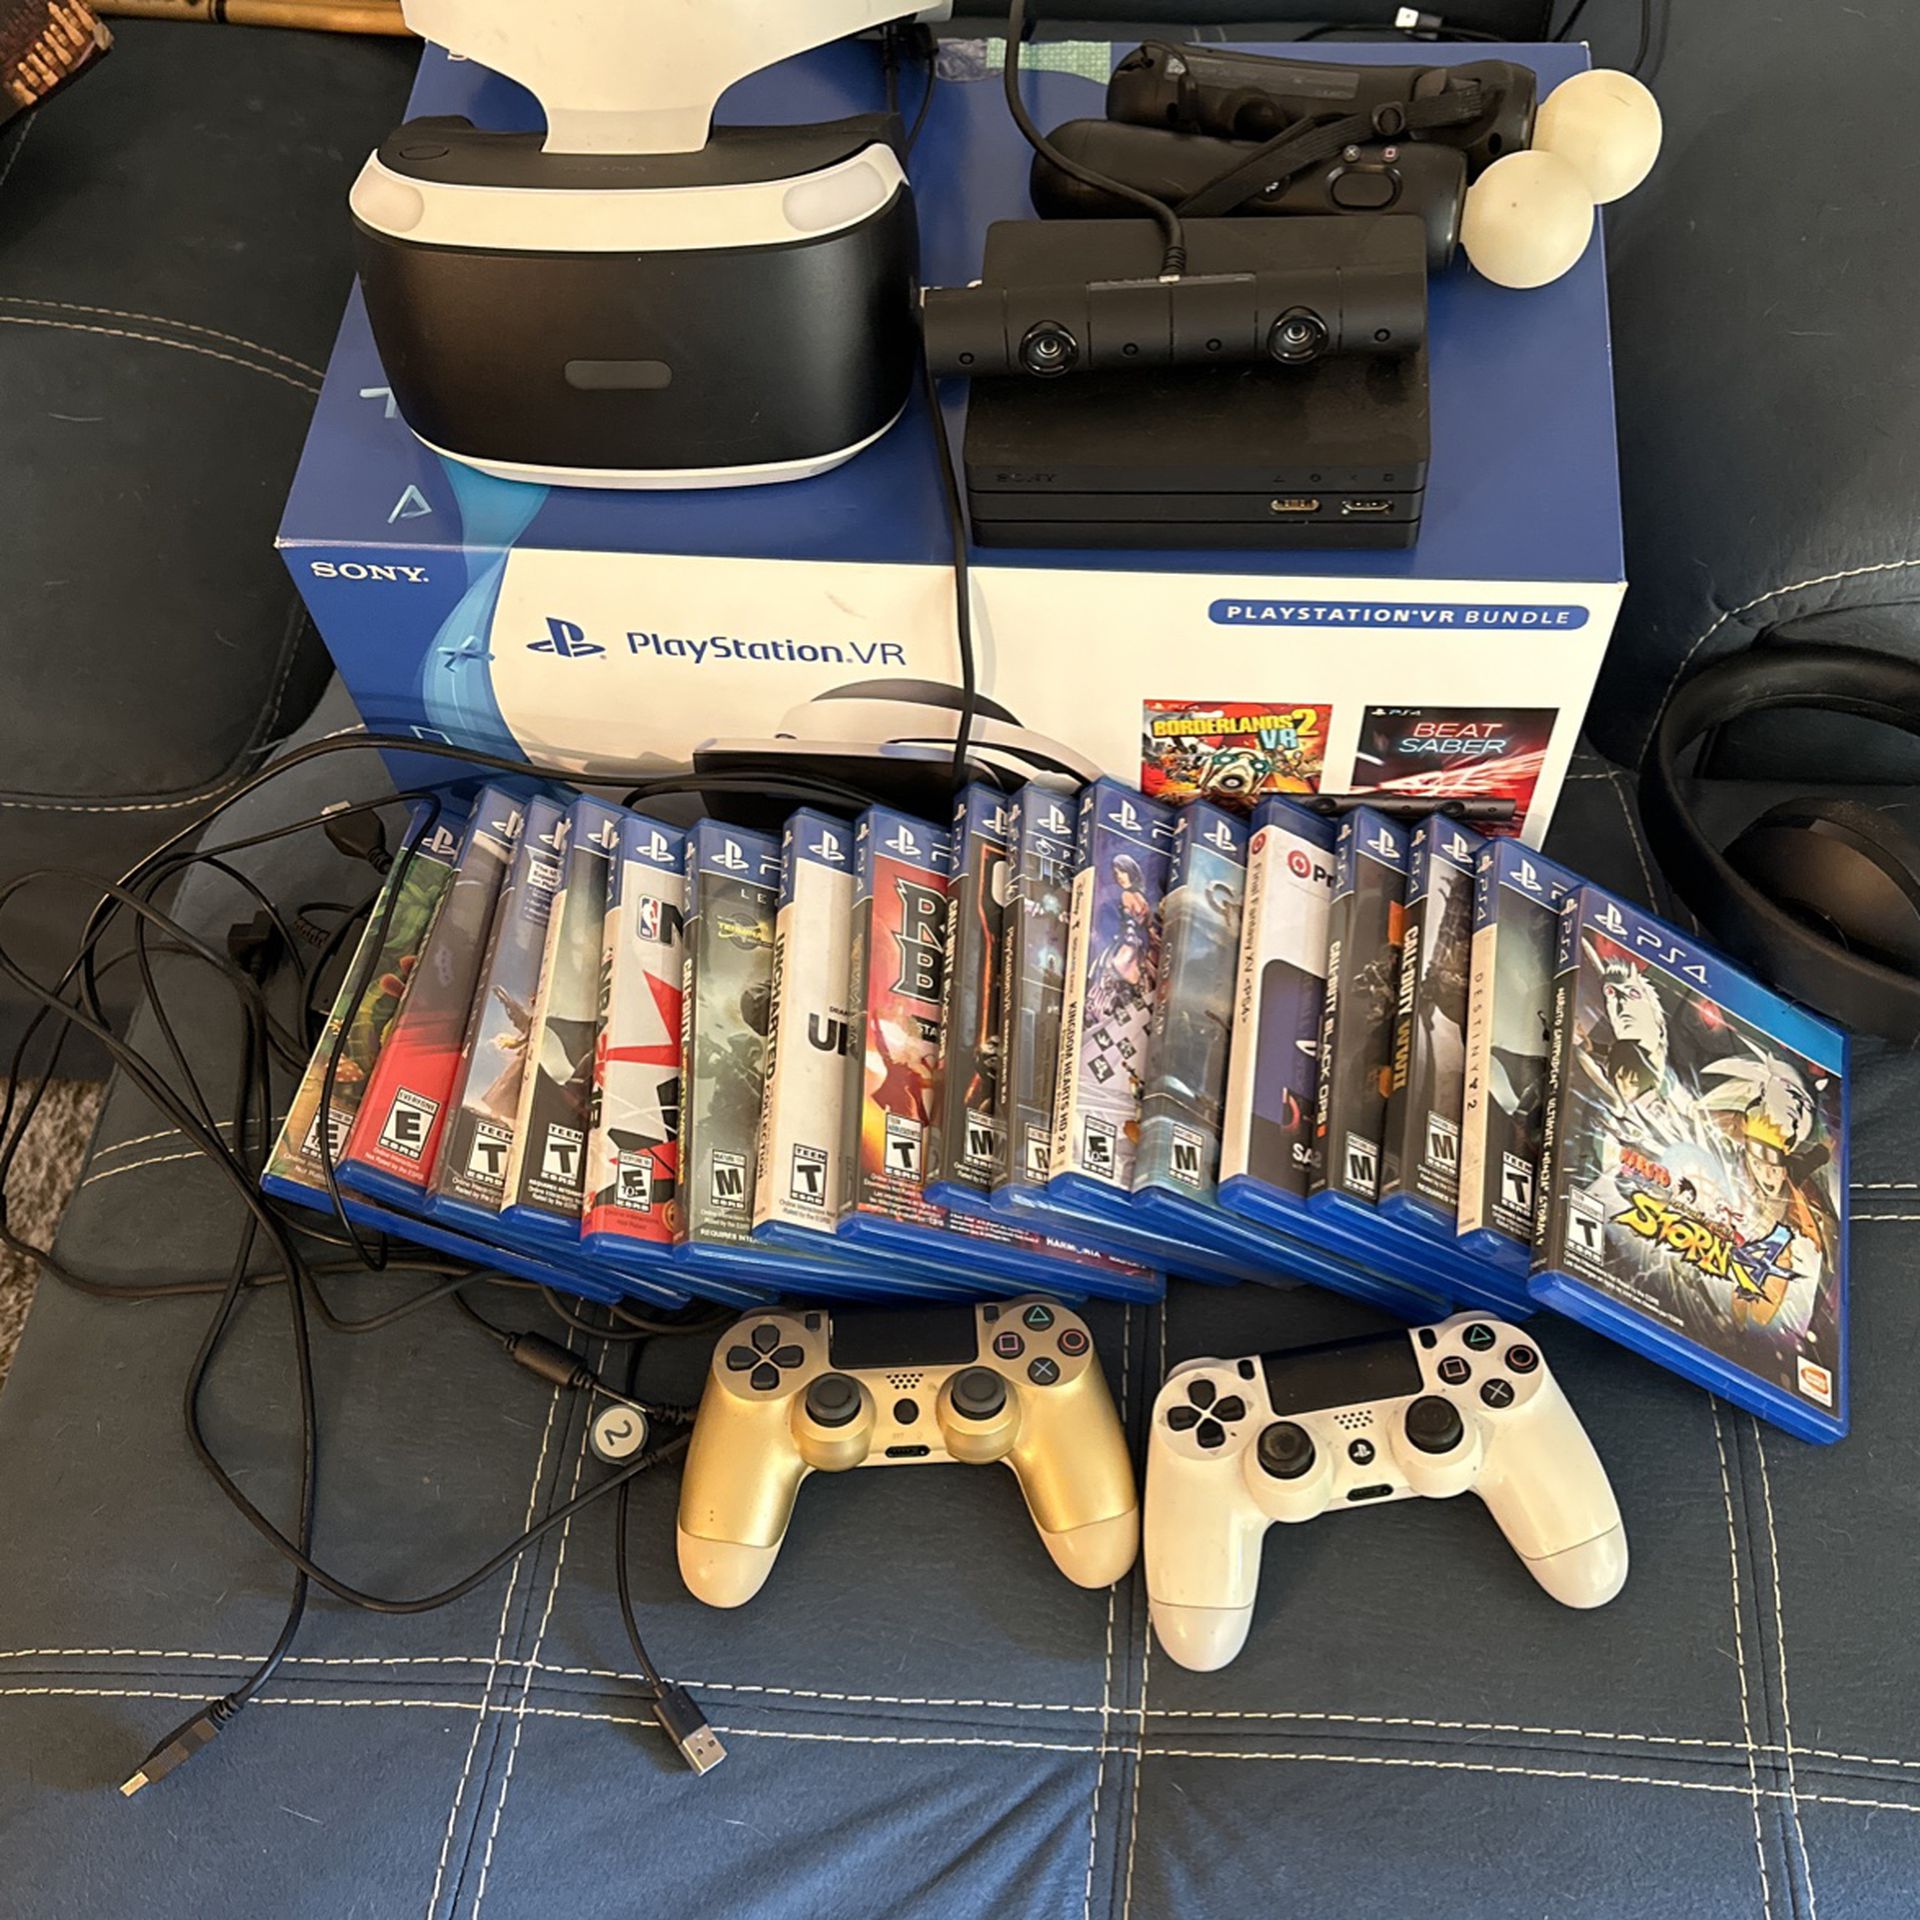 Vr Bundle With Games And Controllers $150